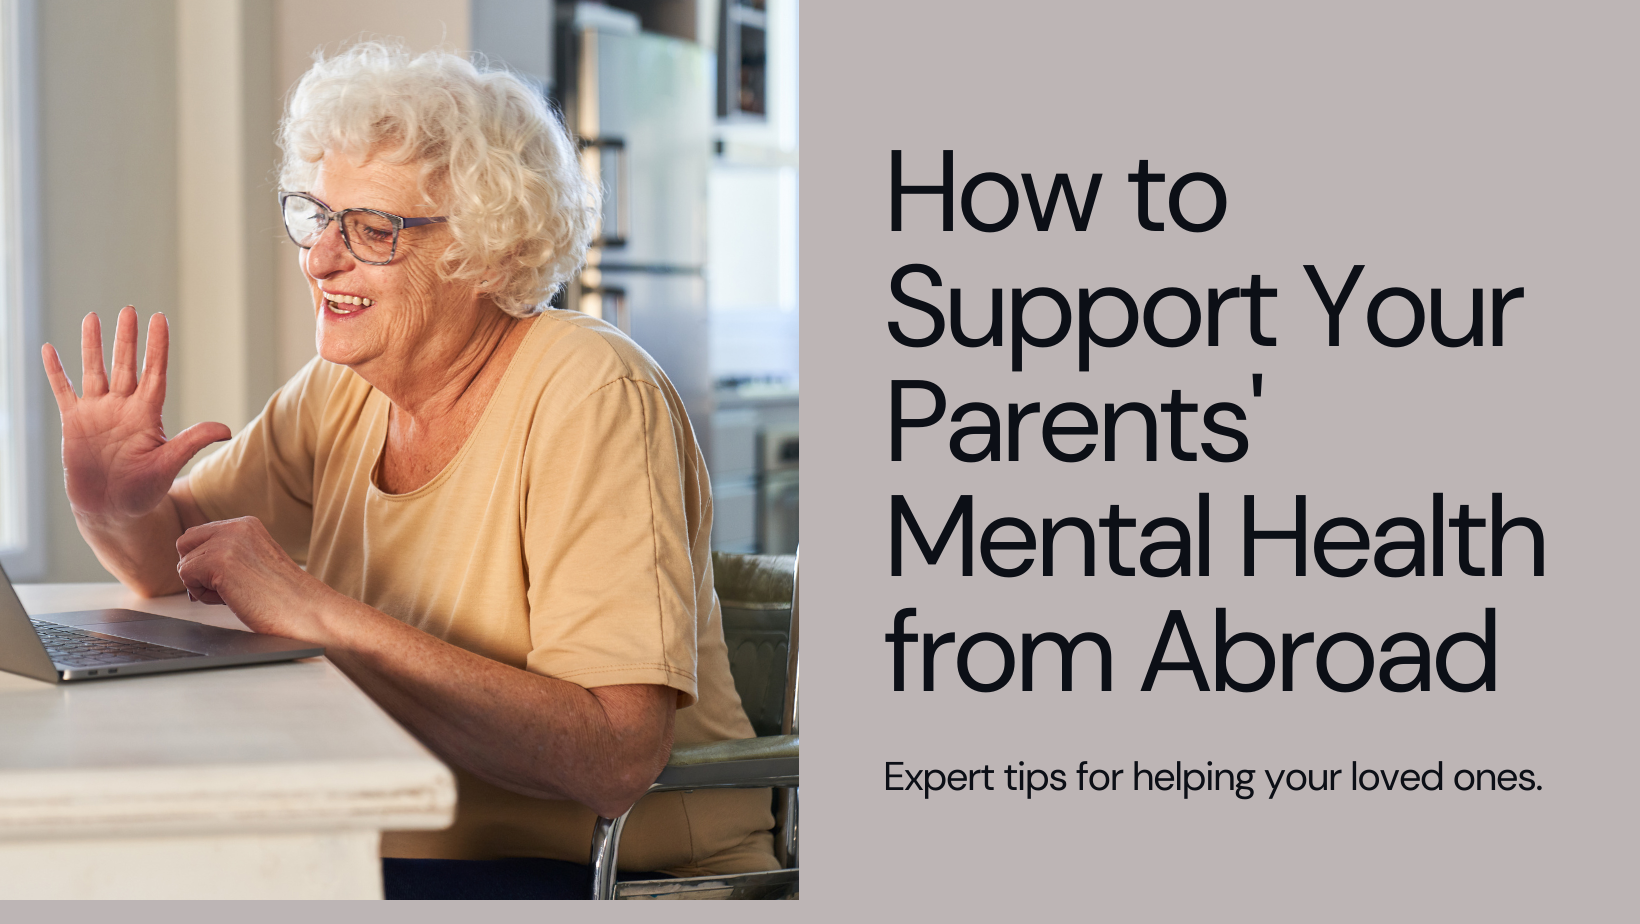 Long-Distance Family Ties: Supporting Your Parents' Mental Health from Abroad